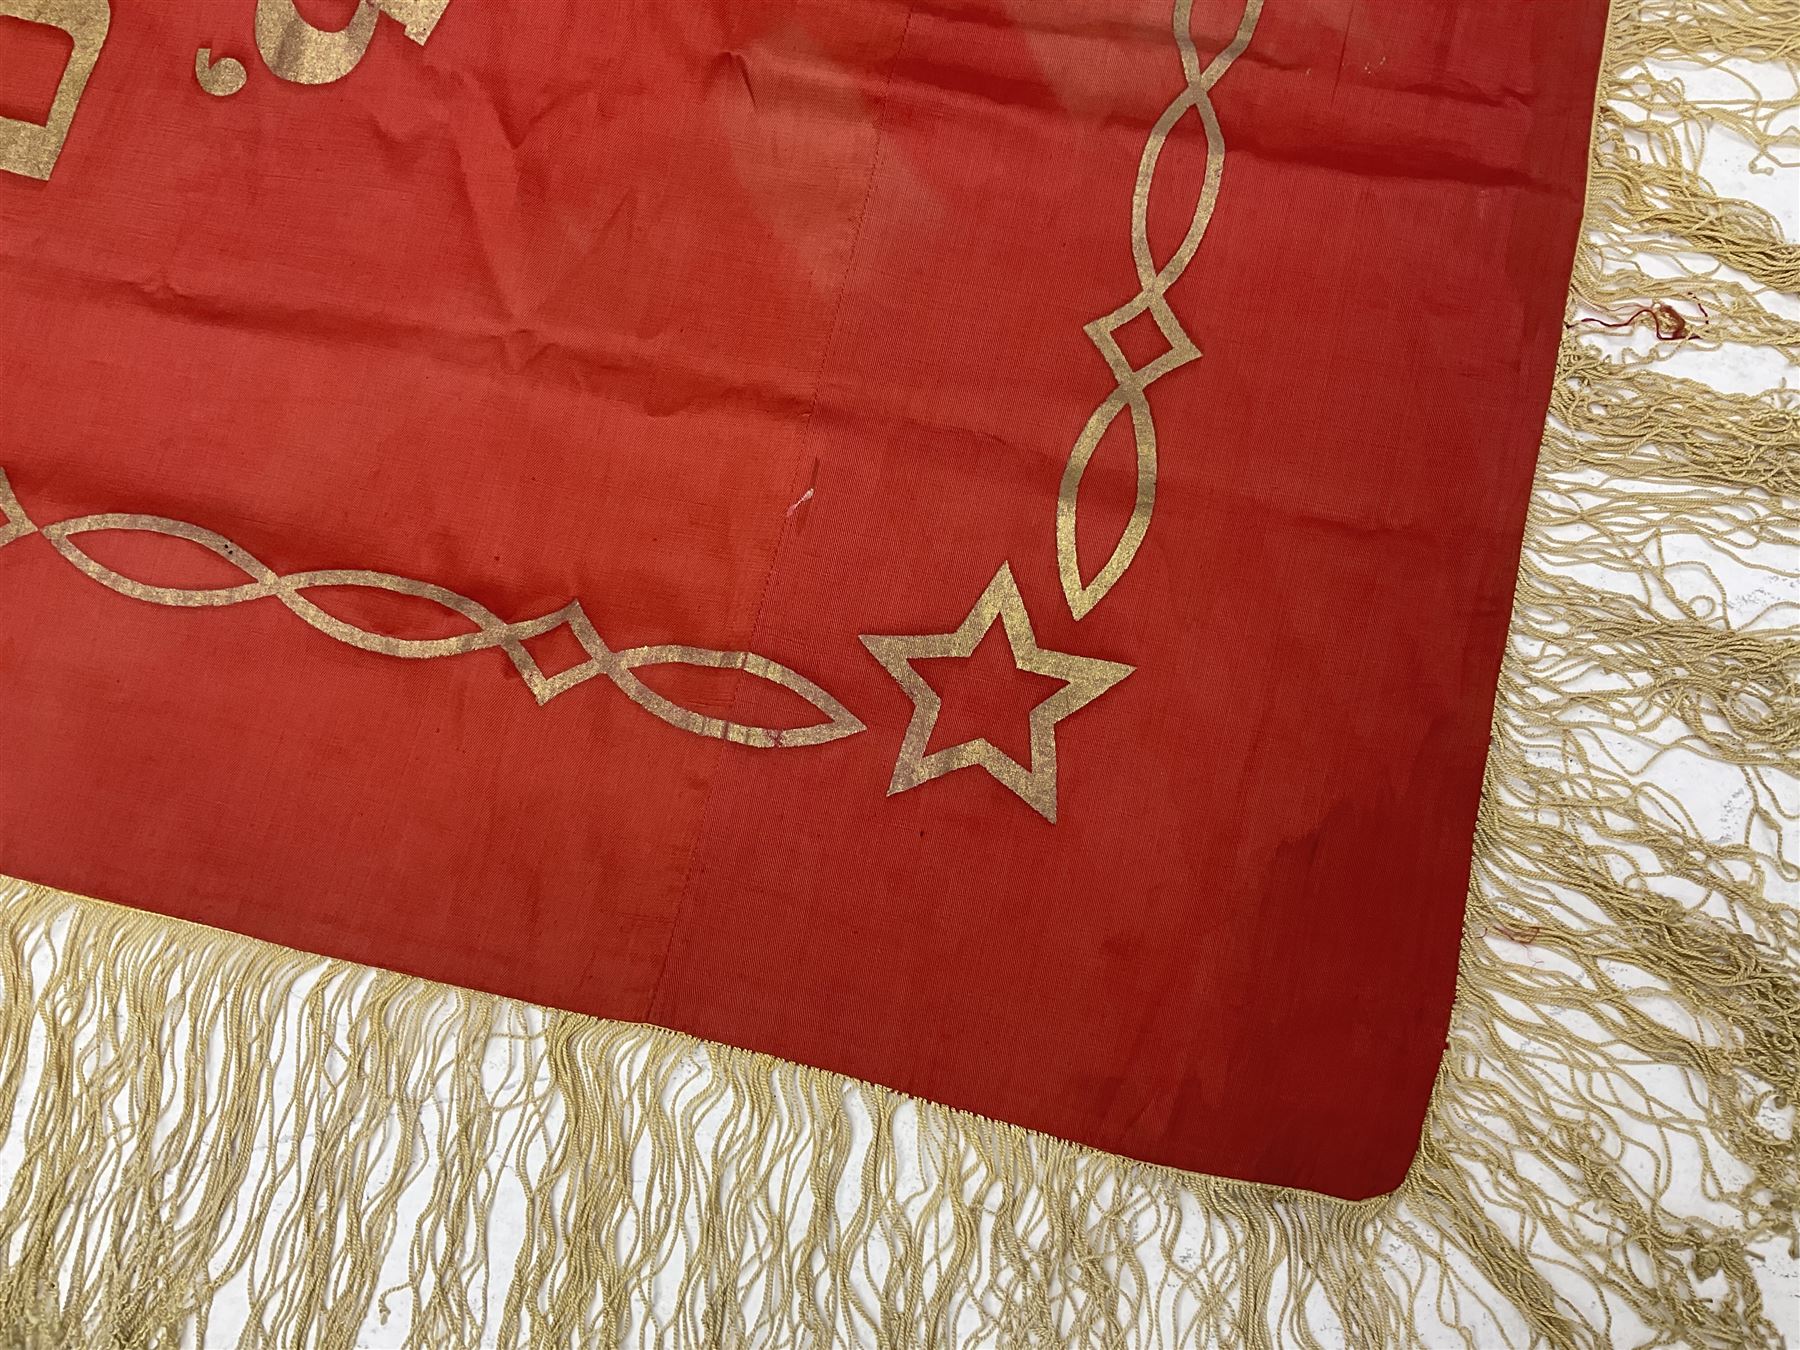 1970s Soviet banner printed in gold on a red ground - Image 9 of 38